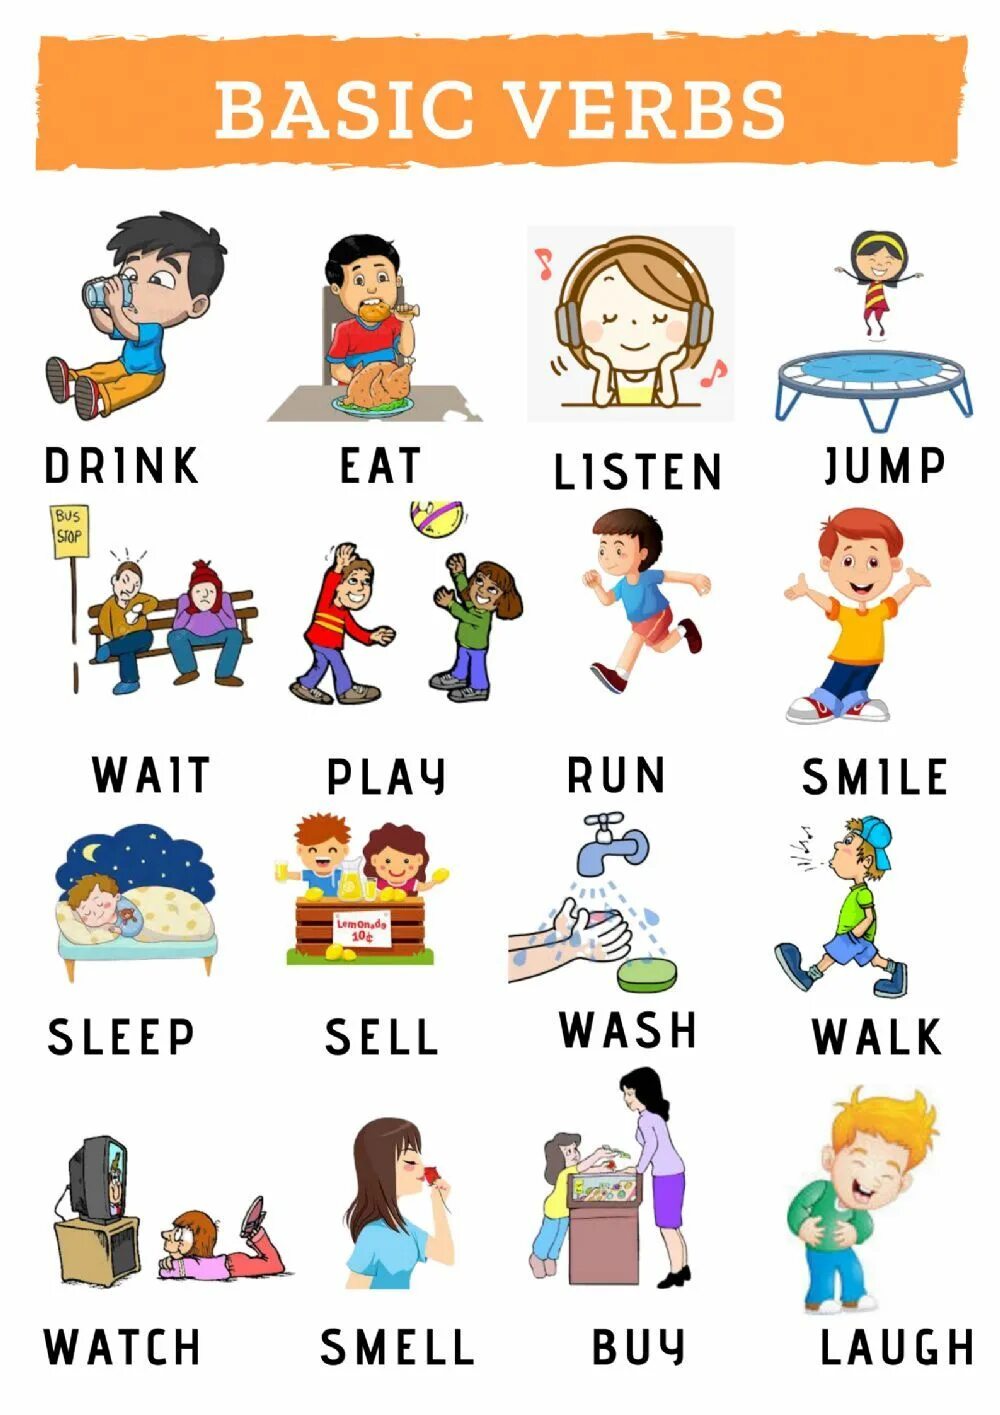 Basic verbs in English. Action verbs в английском. Глаголы действия на английском. Английский verbs for Kids. Actions move